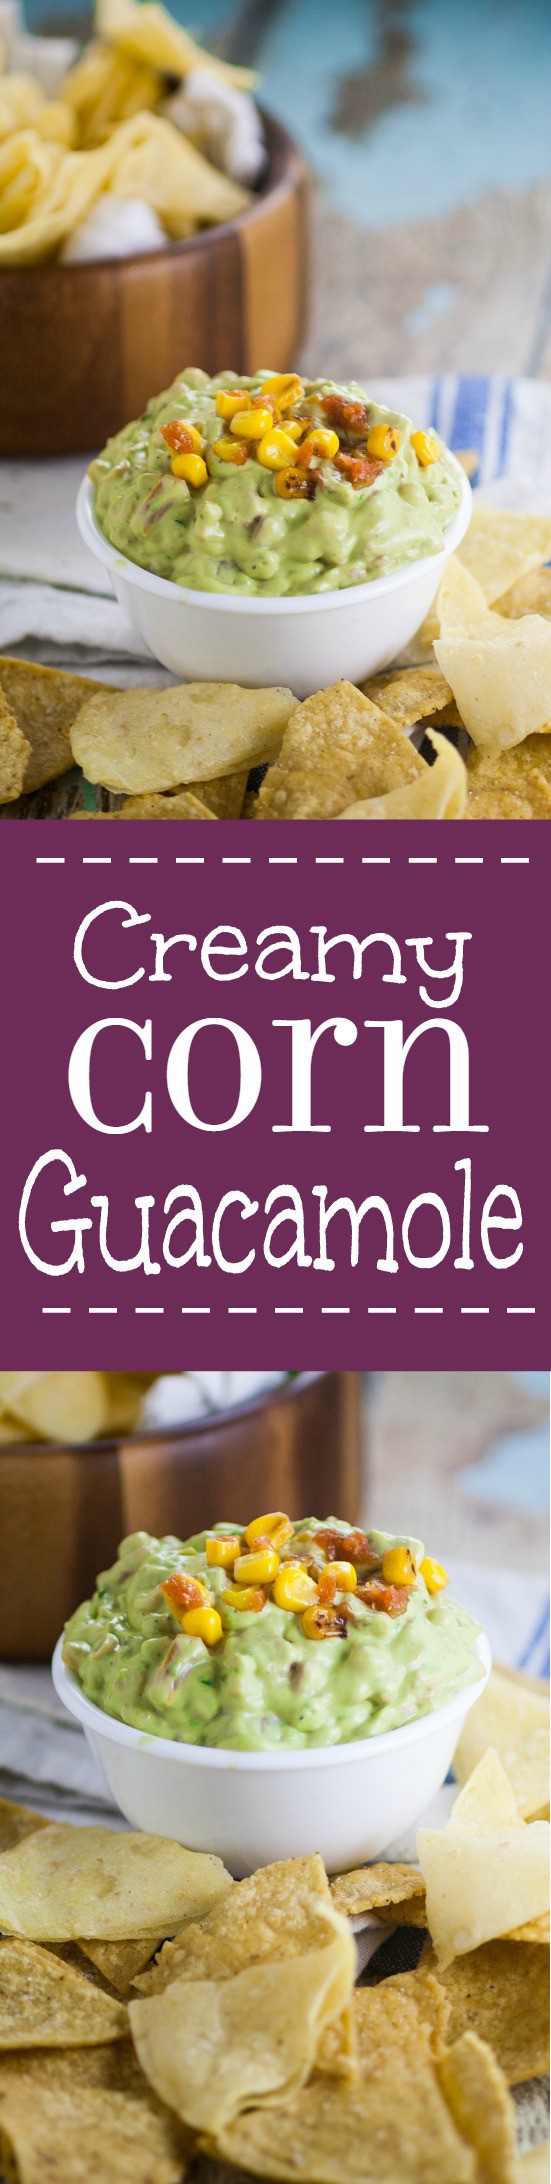 Creamy Corn Guacamole is the the perfect easy appetizer dip recipe for your next party.  Chunky and delicious Creamy Corn Guacamole with charred corn, tomatoes, onions, and creamy avocados.  Plus a special, easy ingredient to bring this amazing dip to the next creamy level. Must try!